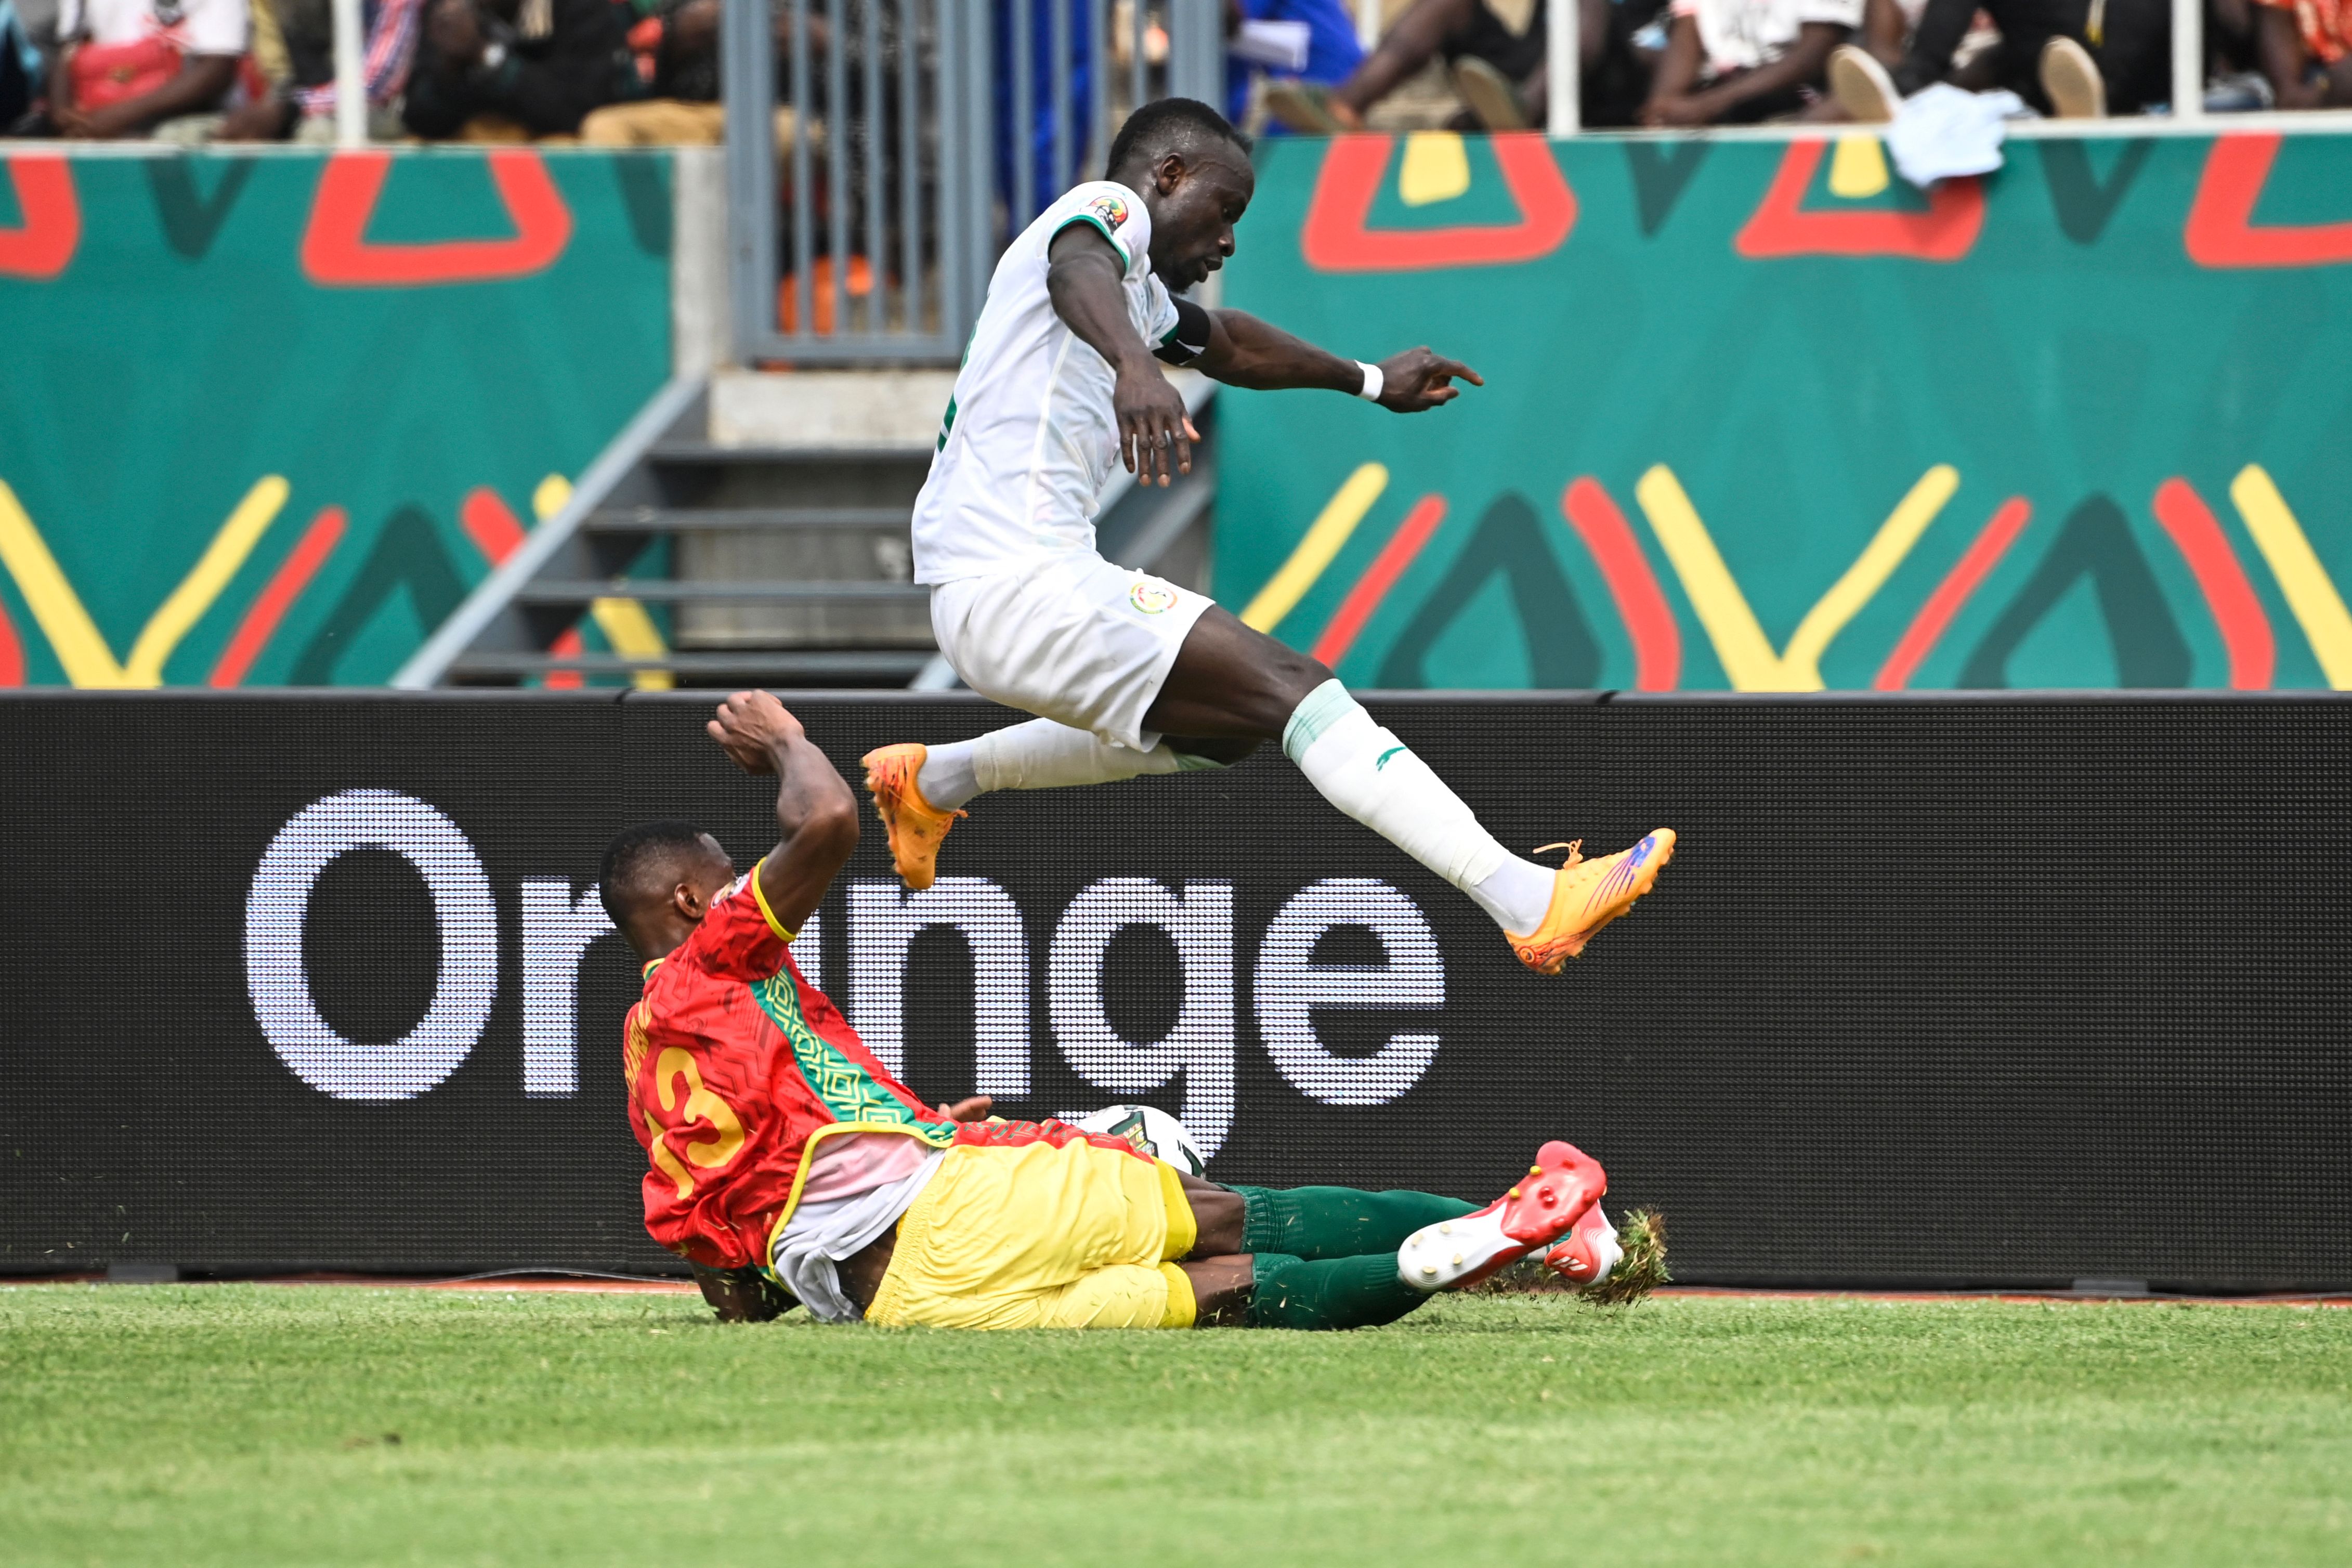 Guinea’s defender Issiaga Sylla (down) tackles Senegal’s forward Sadio Mane during the Group B Africa Cup of Nations (CAN) 2021 football match between Senegal and Guinea at Stade de Kouekong in Bafoussam on January 14, 2022. (Photo by Pius Utomi EKPEI / AFP)